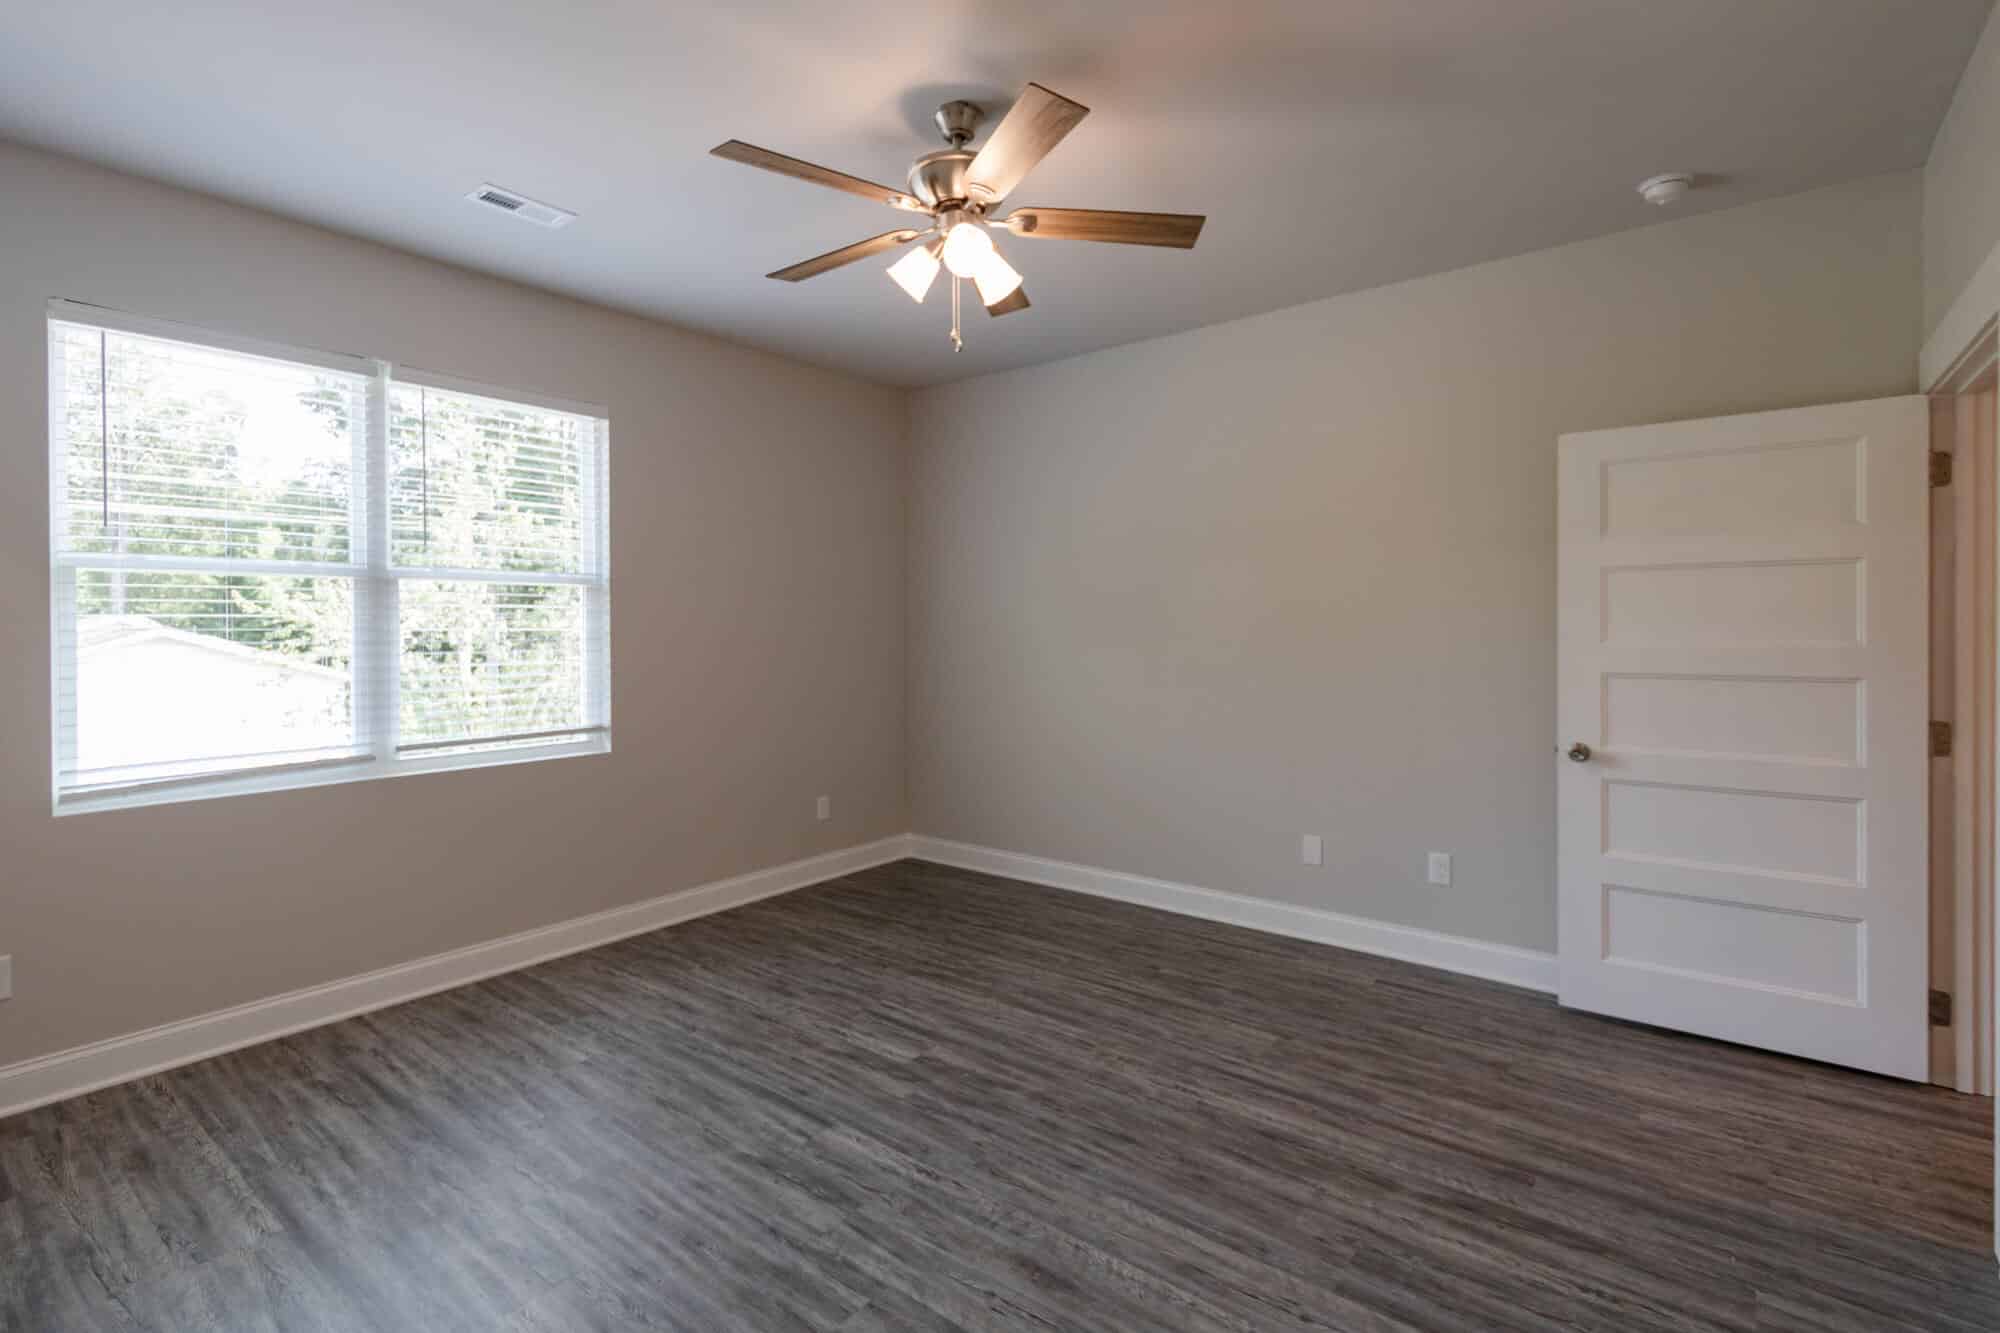 raleigh off campus apartments burt dr off campus apartments near nc state university private bedroom plank wood flooring ceiling fan